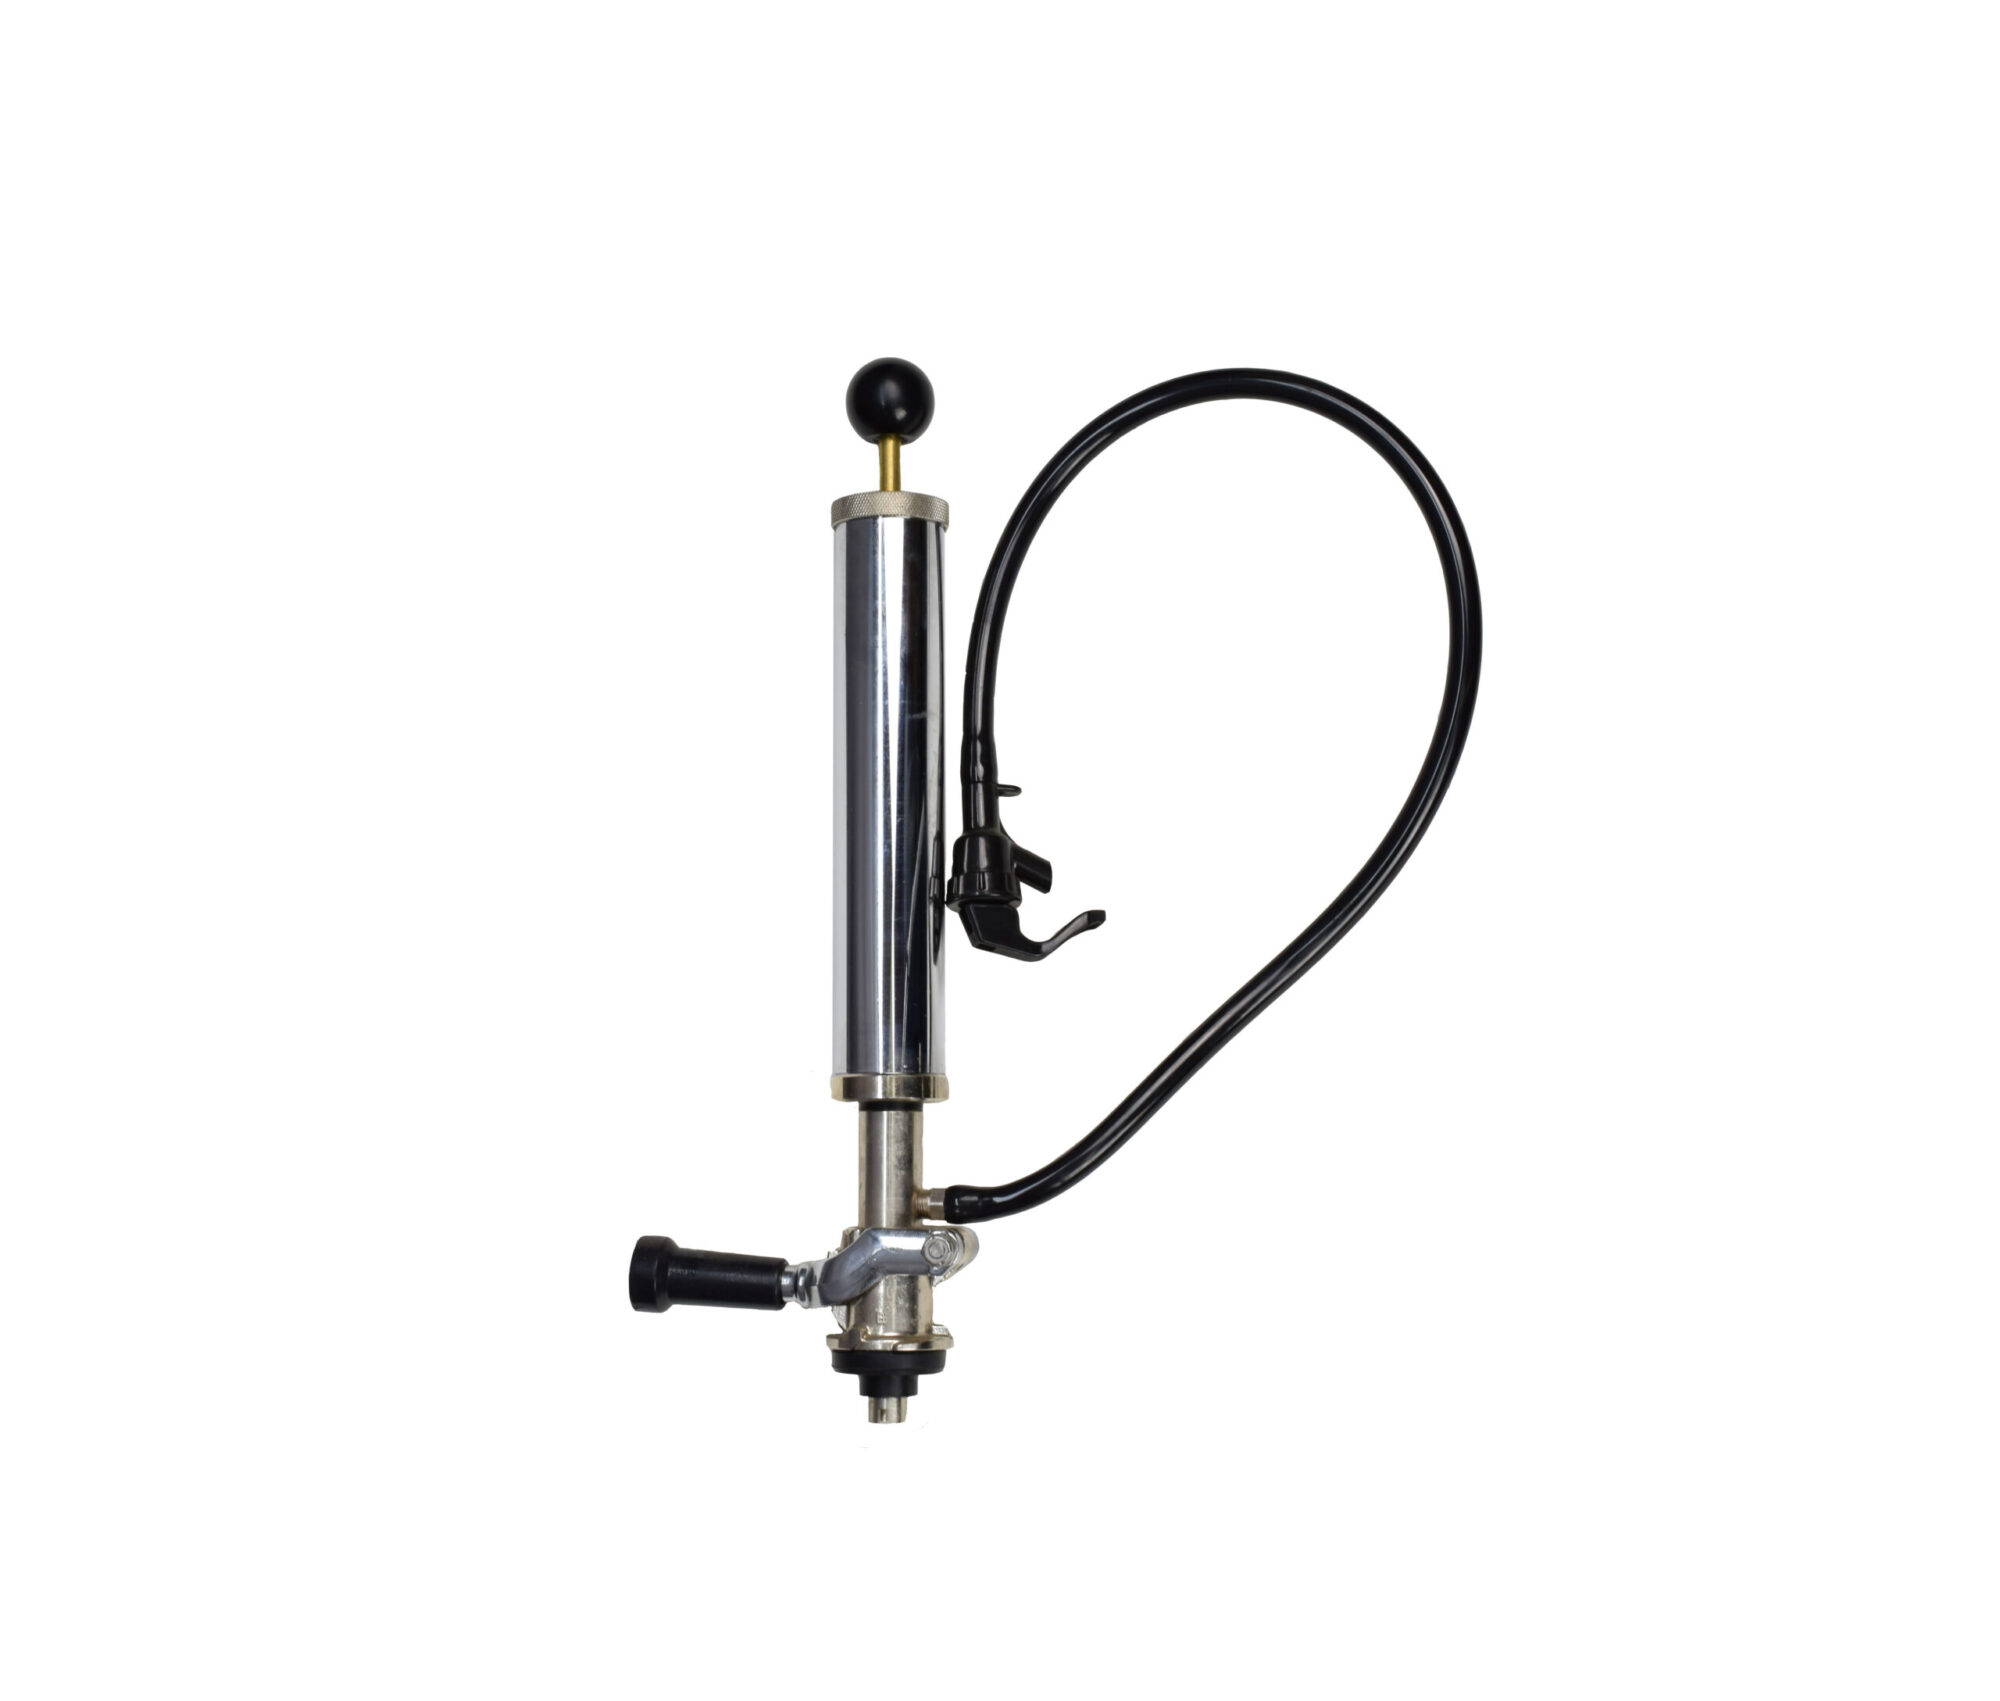 768E-1 Lever Handle Picnic Pump with 8" Pump and Black Handle - "S" System